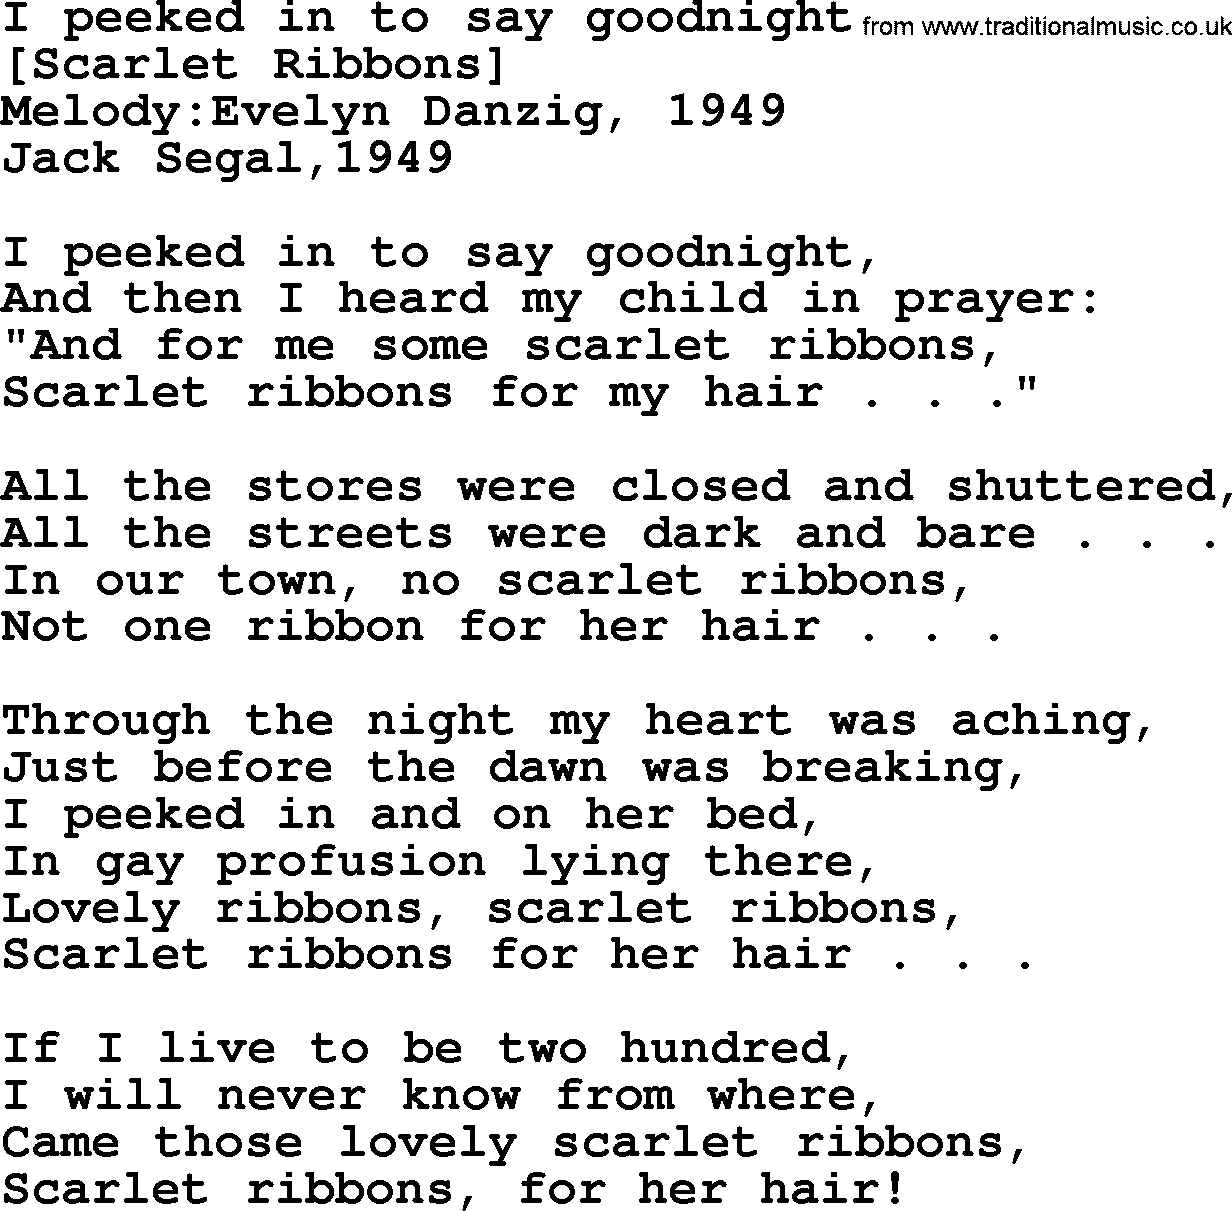 Old American Song: I Peeked In To Say Goodnight, lyrics